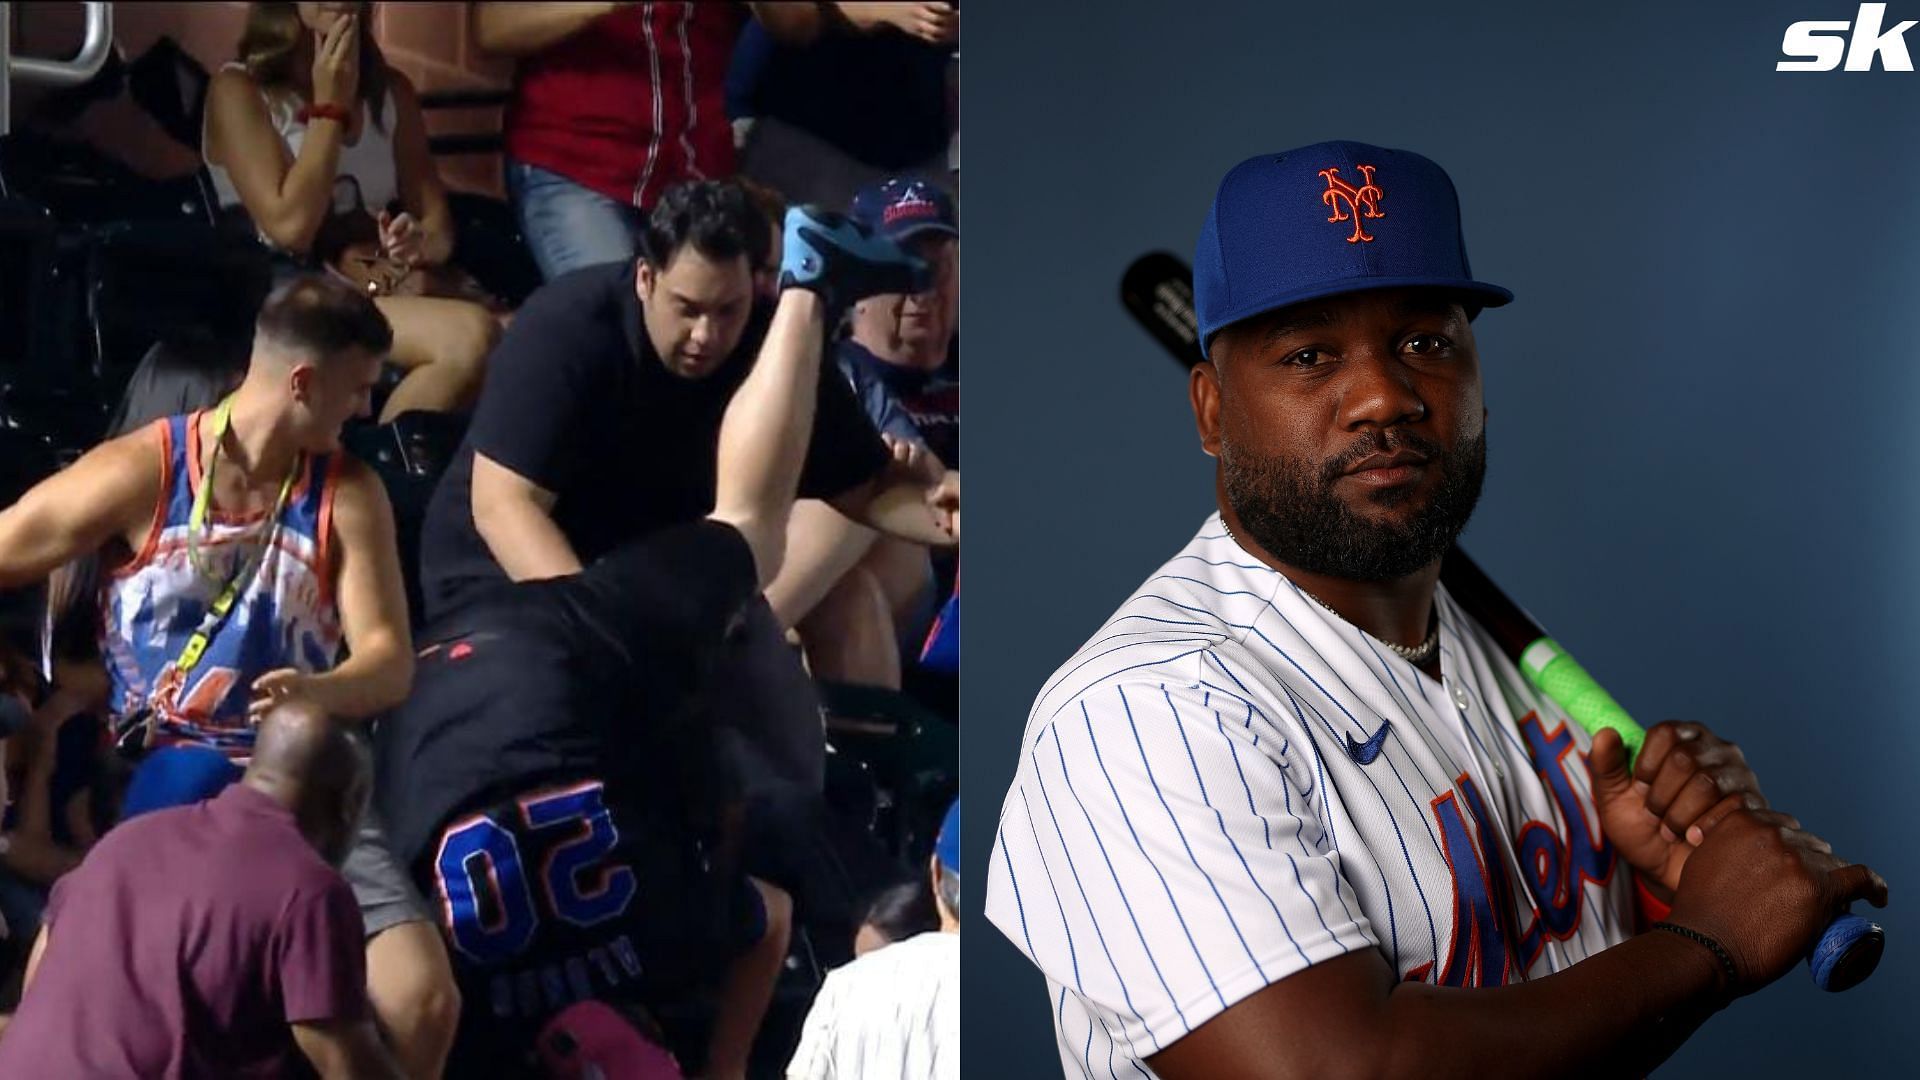 MLB fan takes a hard tumble down the seats while trying to catch a foul ball by Abraham Almonte